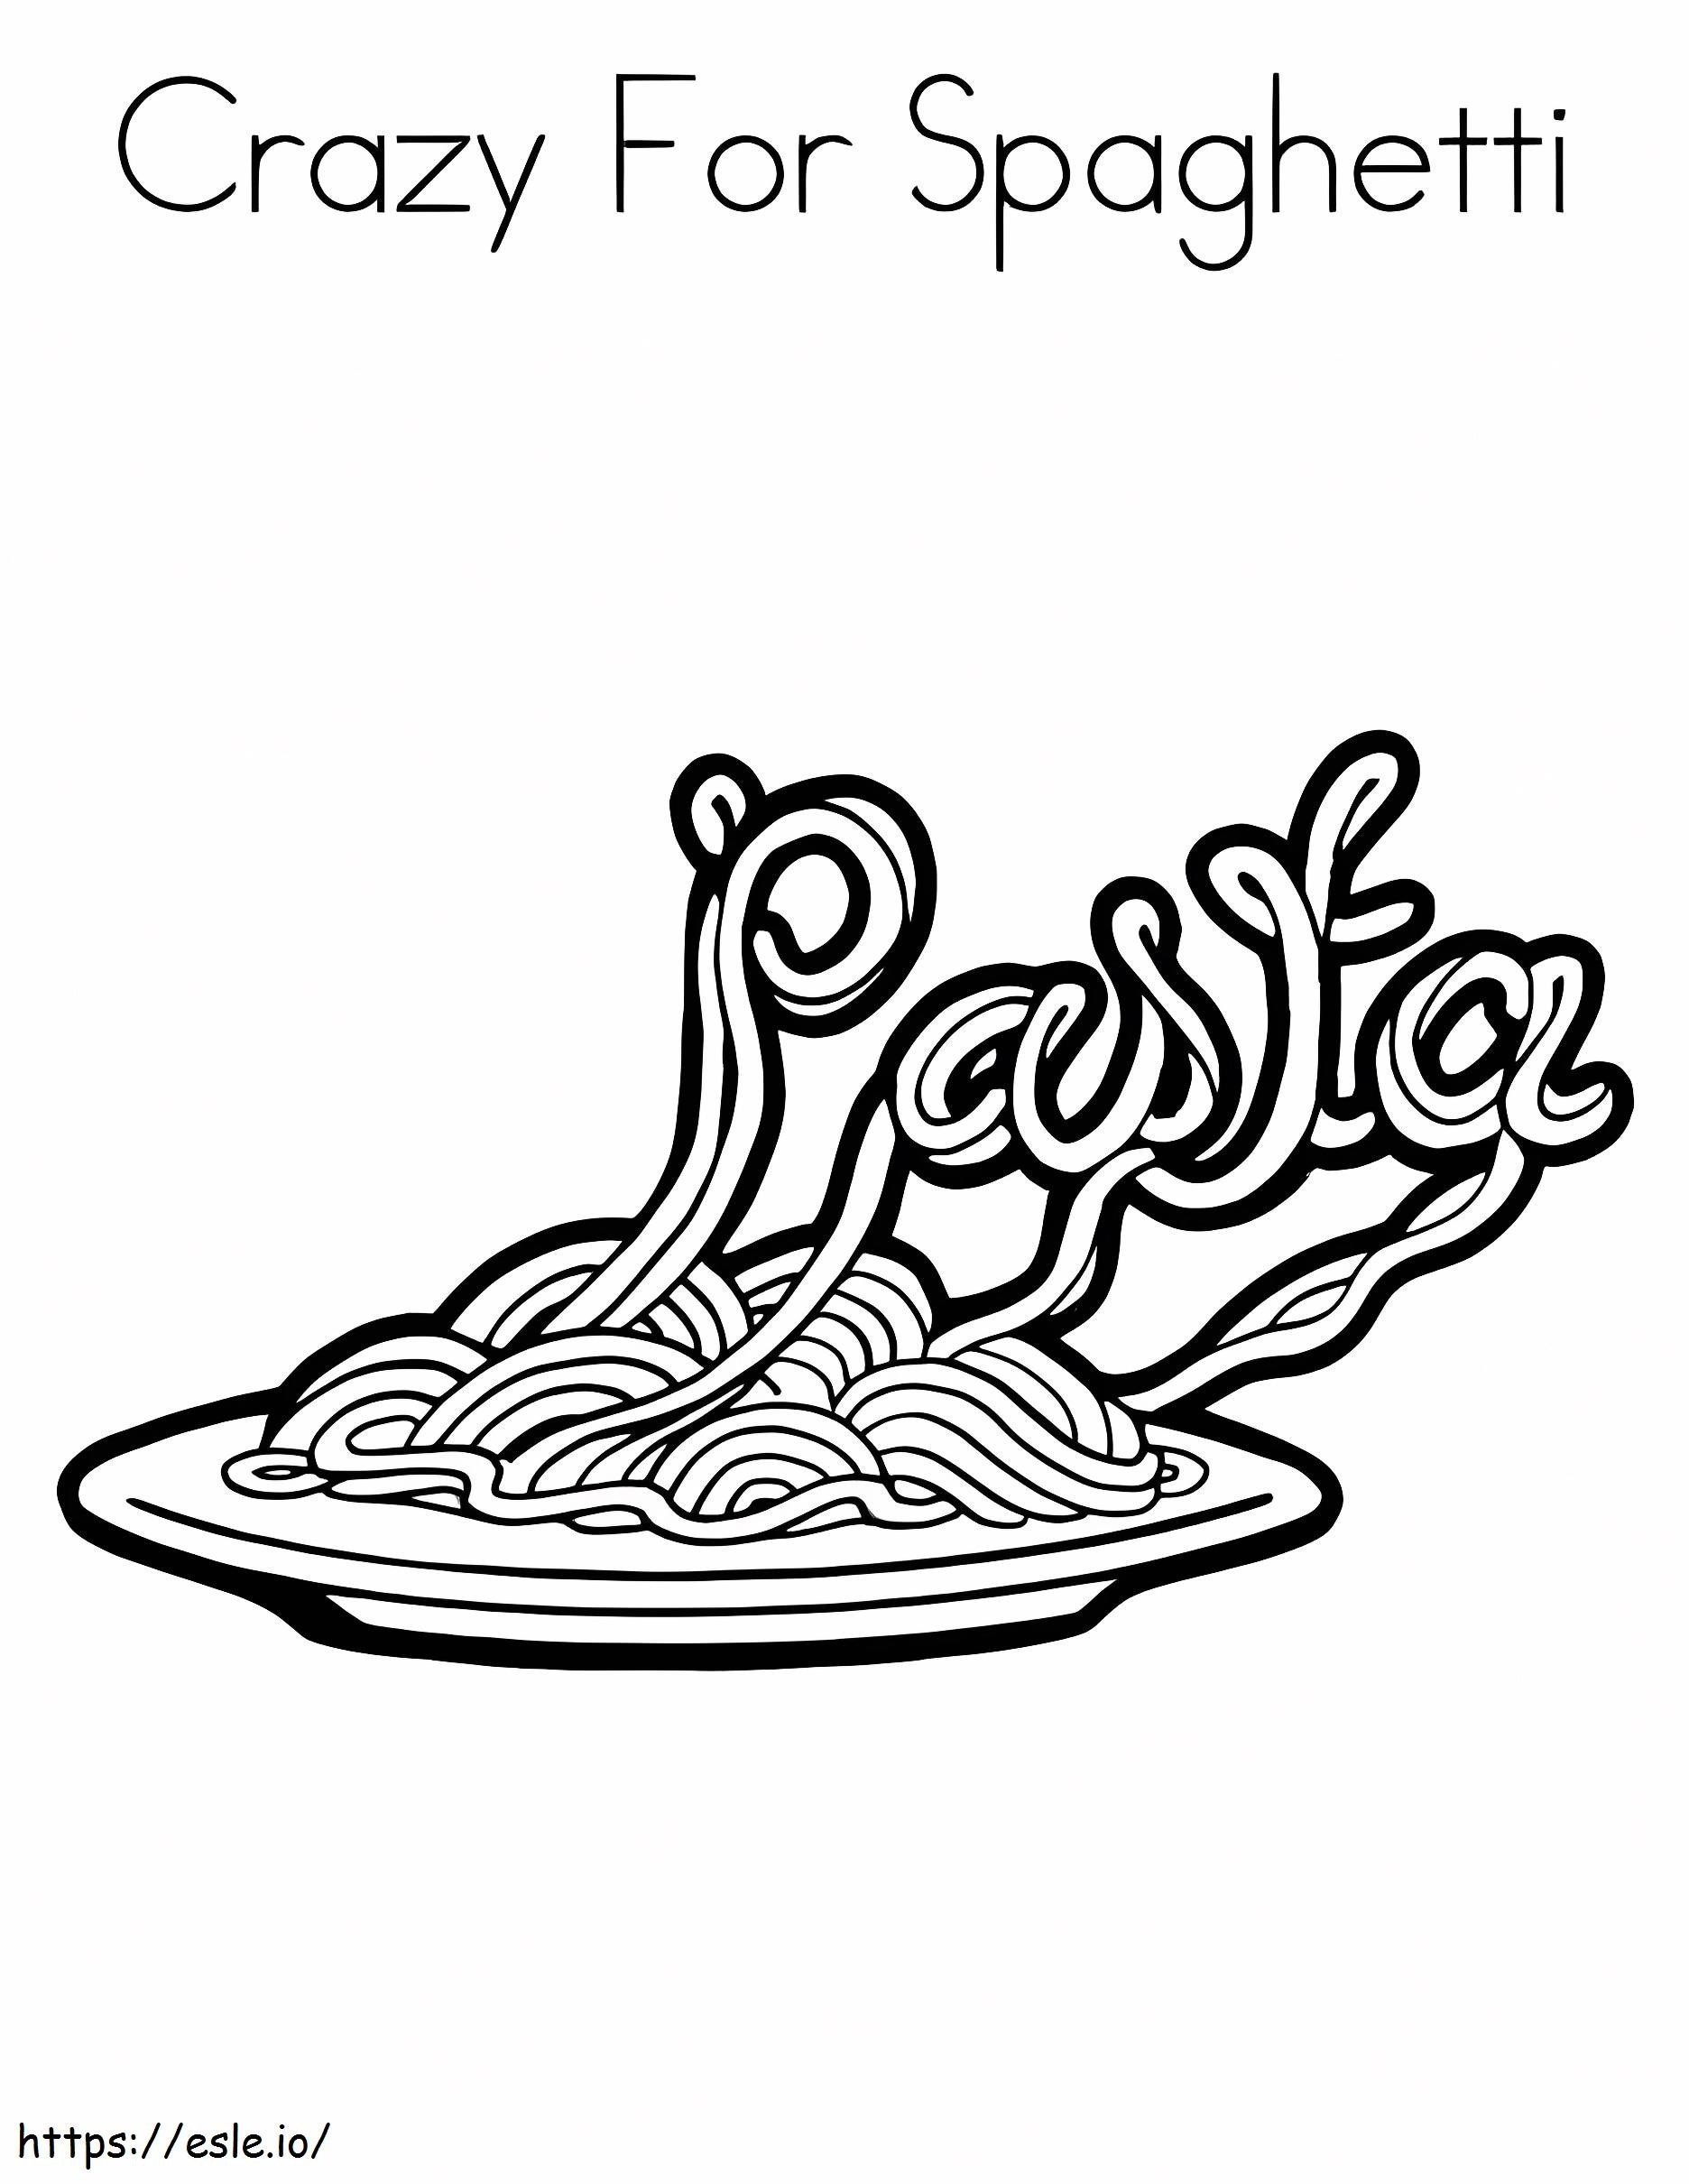 Crazy About Spaghetti coloring page